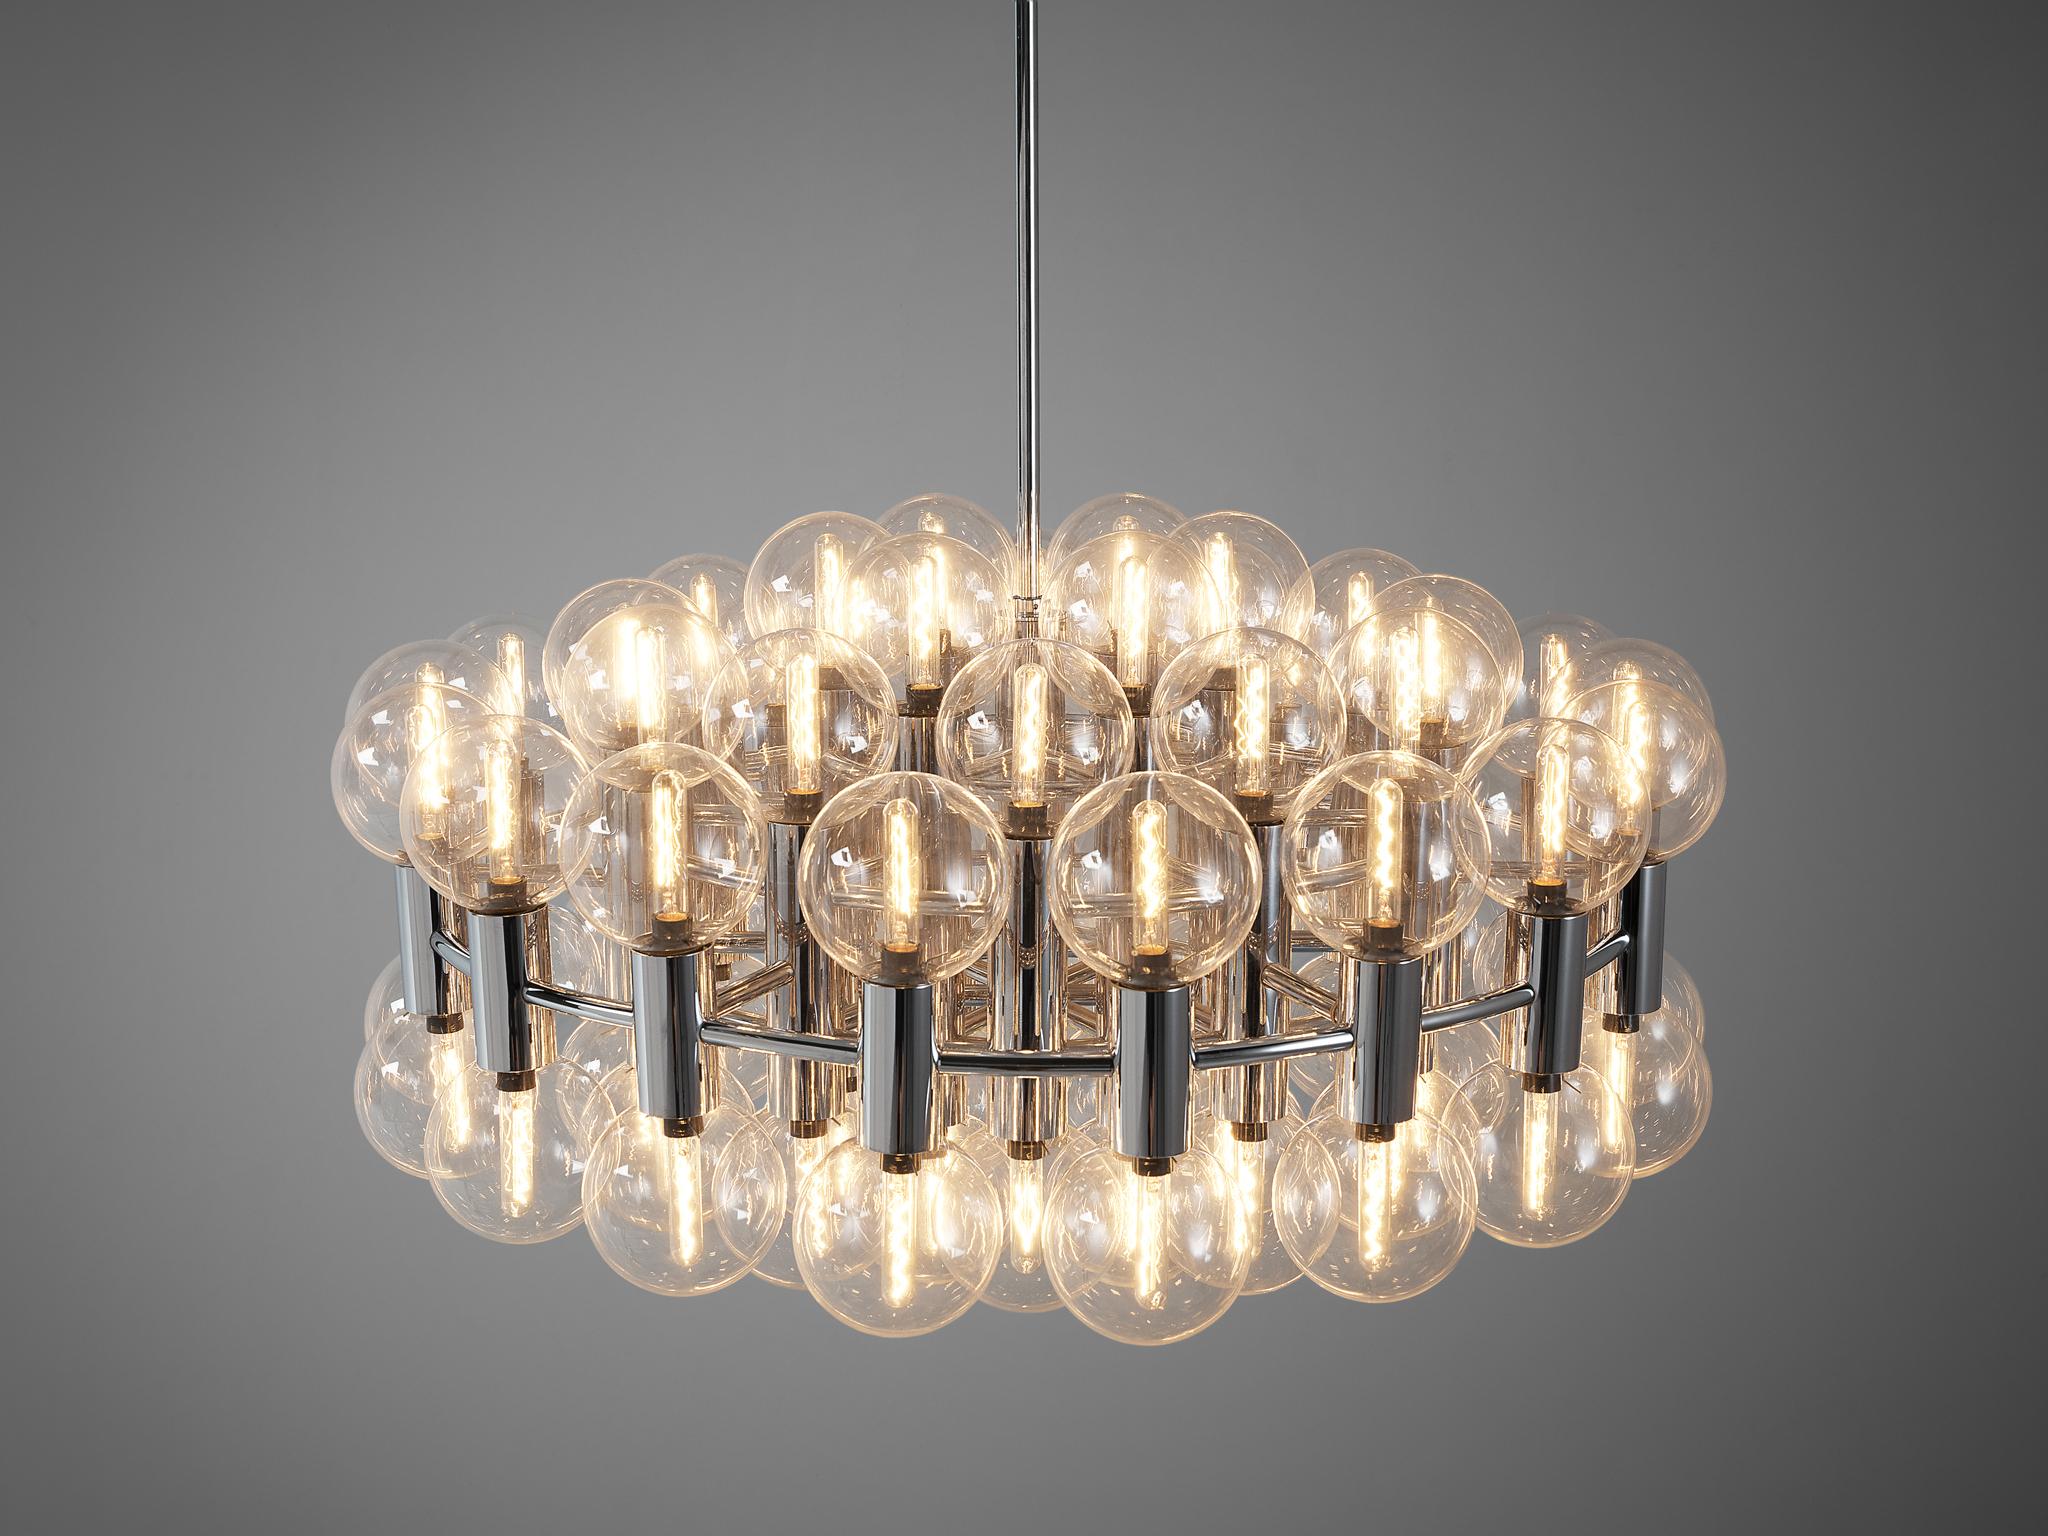  Motoko Ishii for Staff Leuchten Large Chandelier in Chrome with 72 Glass Orbs For Sale 3